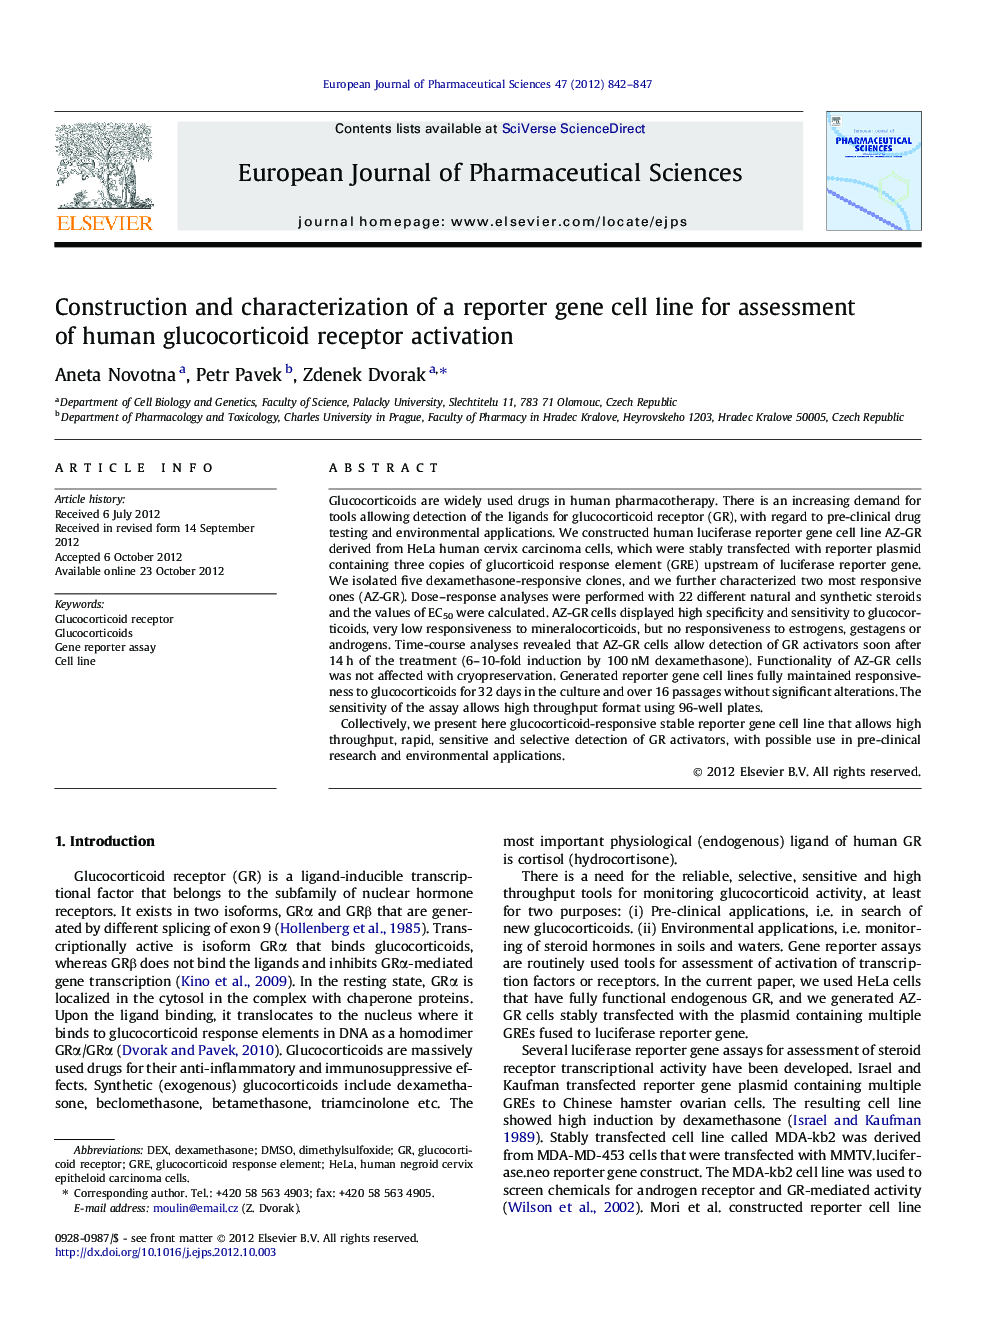 Construction and characterization of a reporter gene cell line for assessment of human glucocorticoid receptor activation